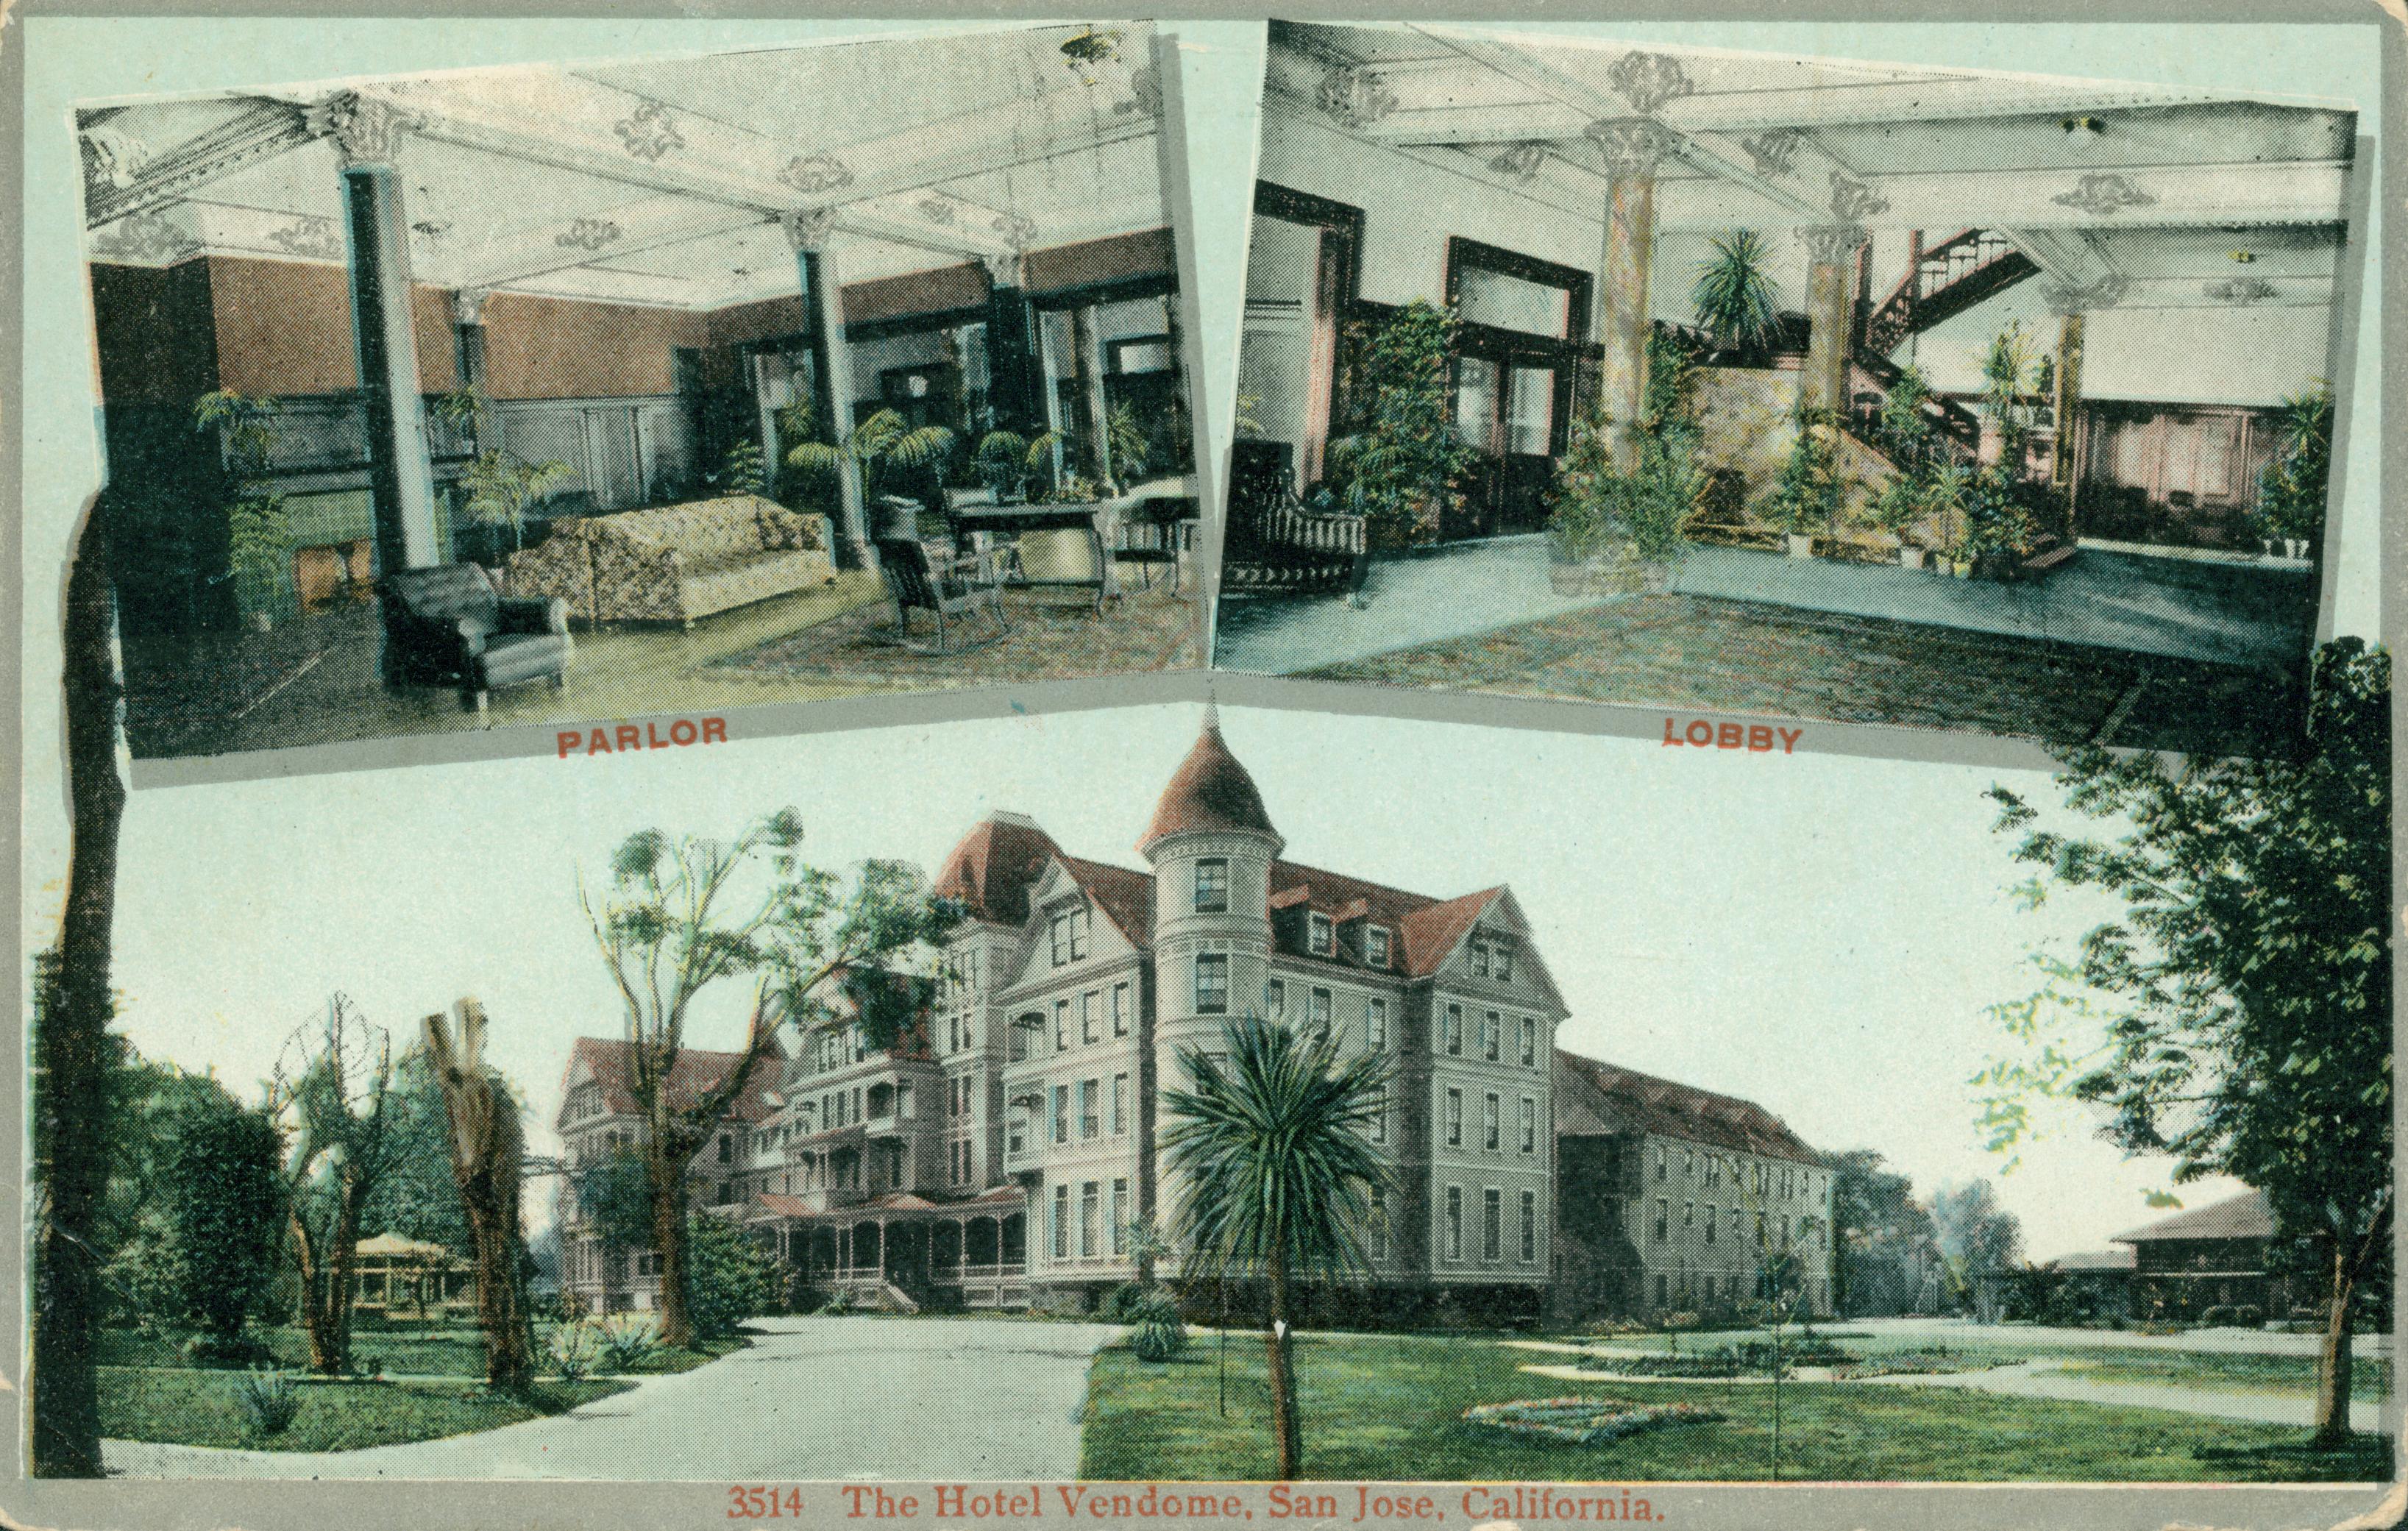 Colorful scene of the Hotel Vendome, road in front of hotel with gardens and trees, two additional interior scenes of lobby and parlor